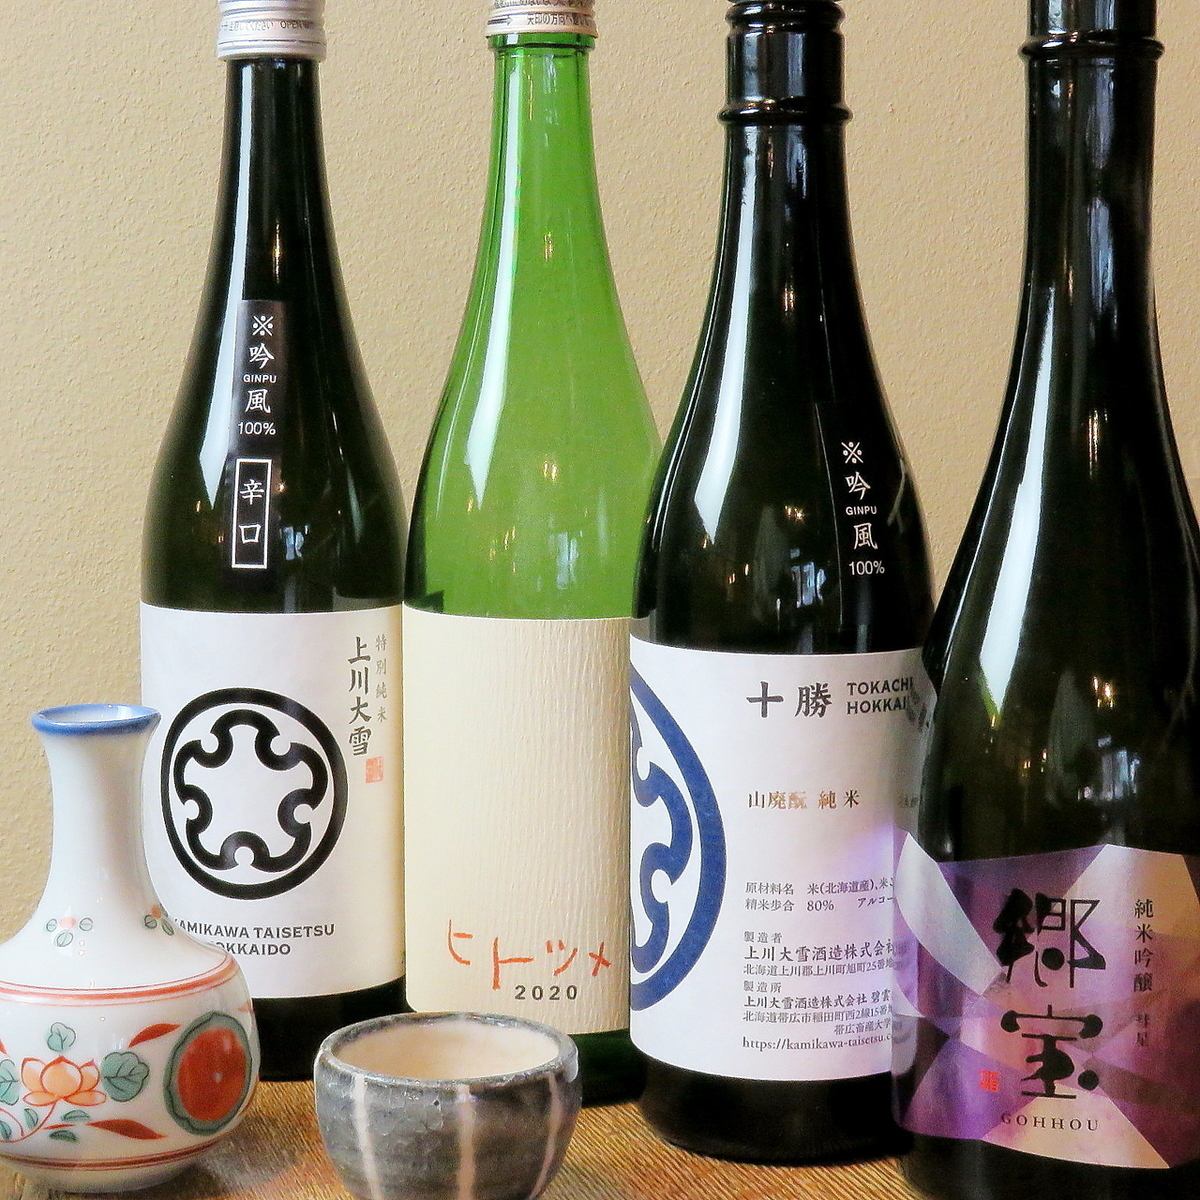 We prepare local sake recommended by the owner carefully selected from the sake breweries in Hokkaido ♪